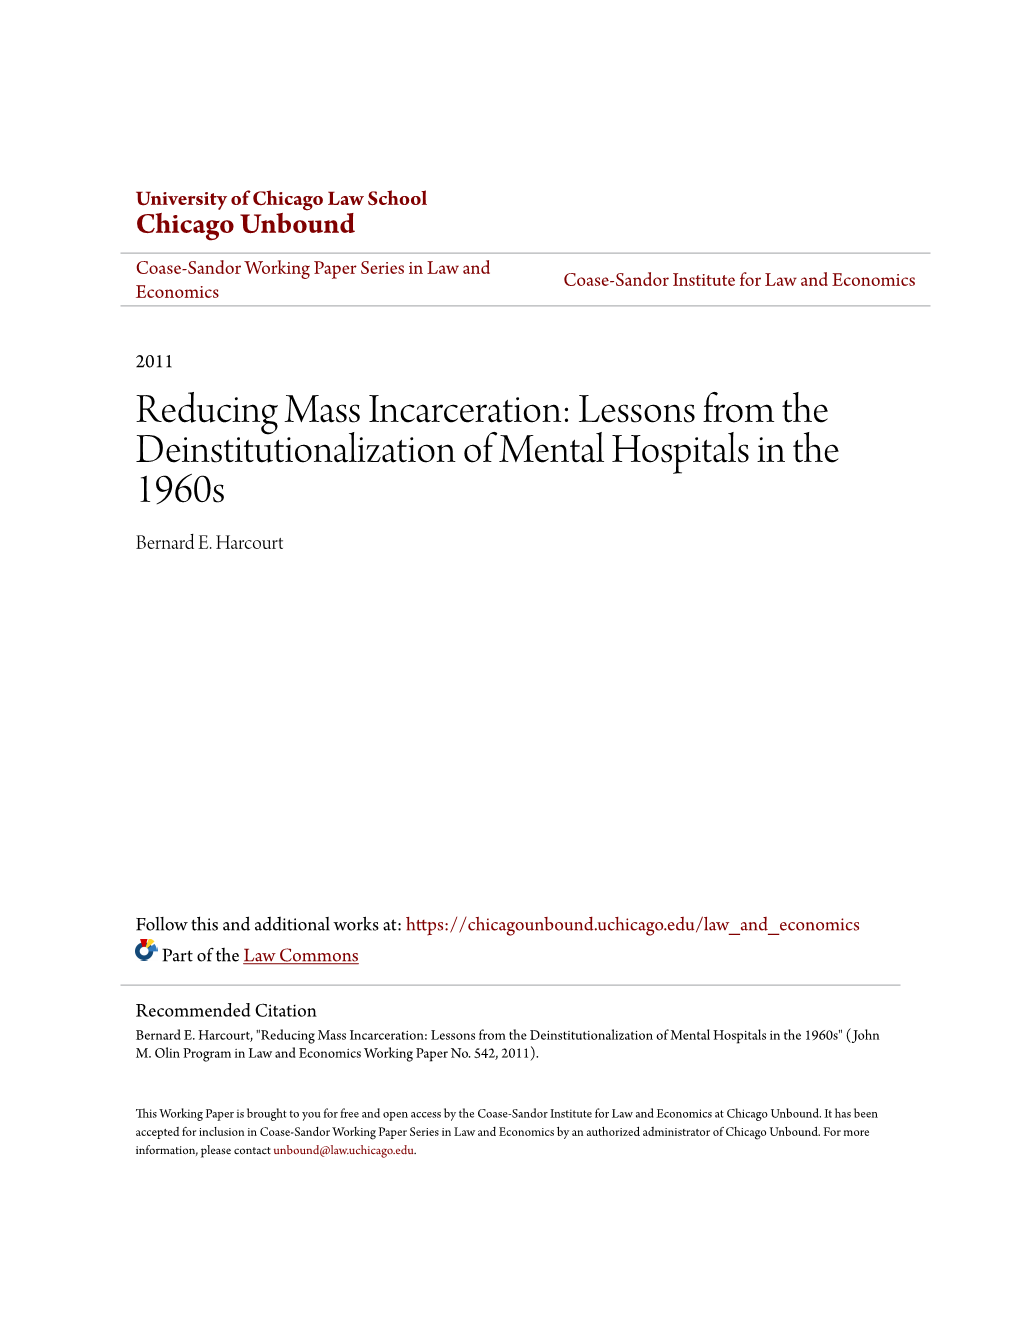 Reducing Mass Incarceration: Lessons from the Deinstitutionalization of Mental Hospitals in the 1960S Bernard E